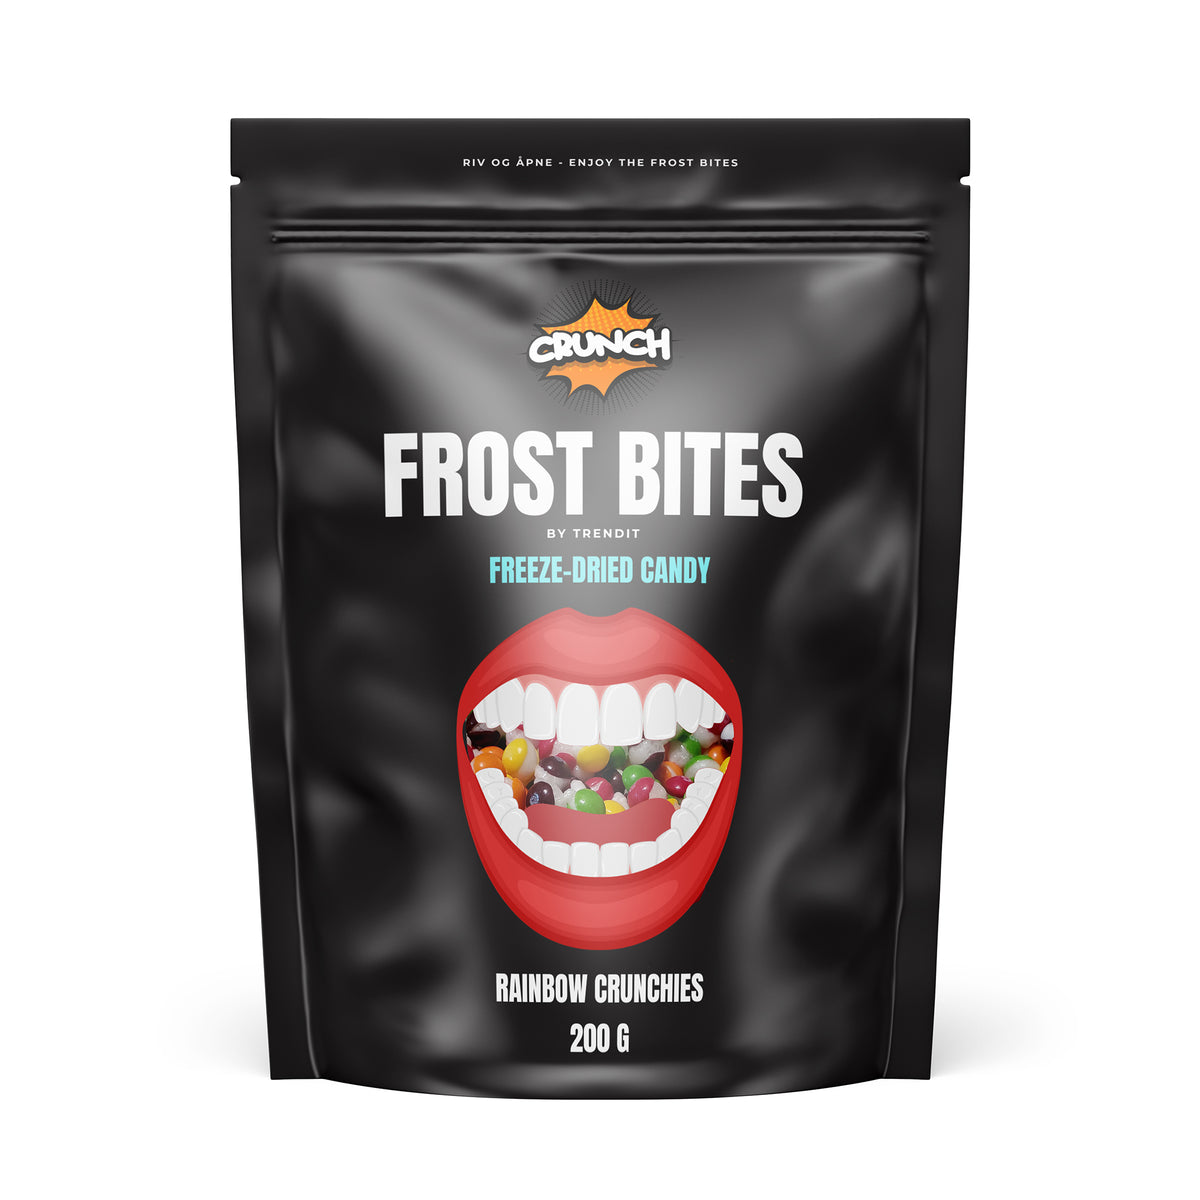 Frost Bites Freeze-Dried candy - Rainbow Crunchies